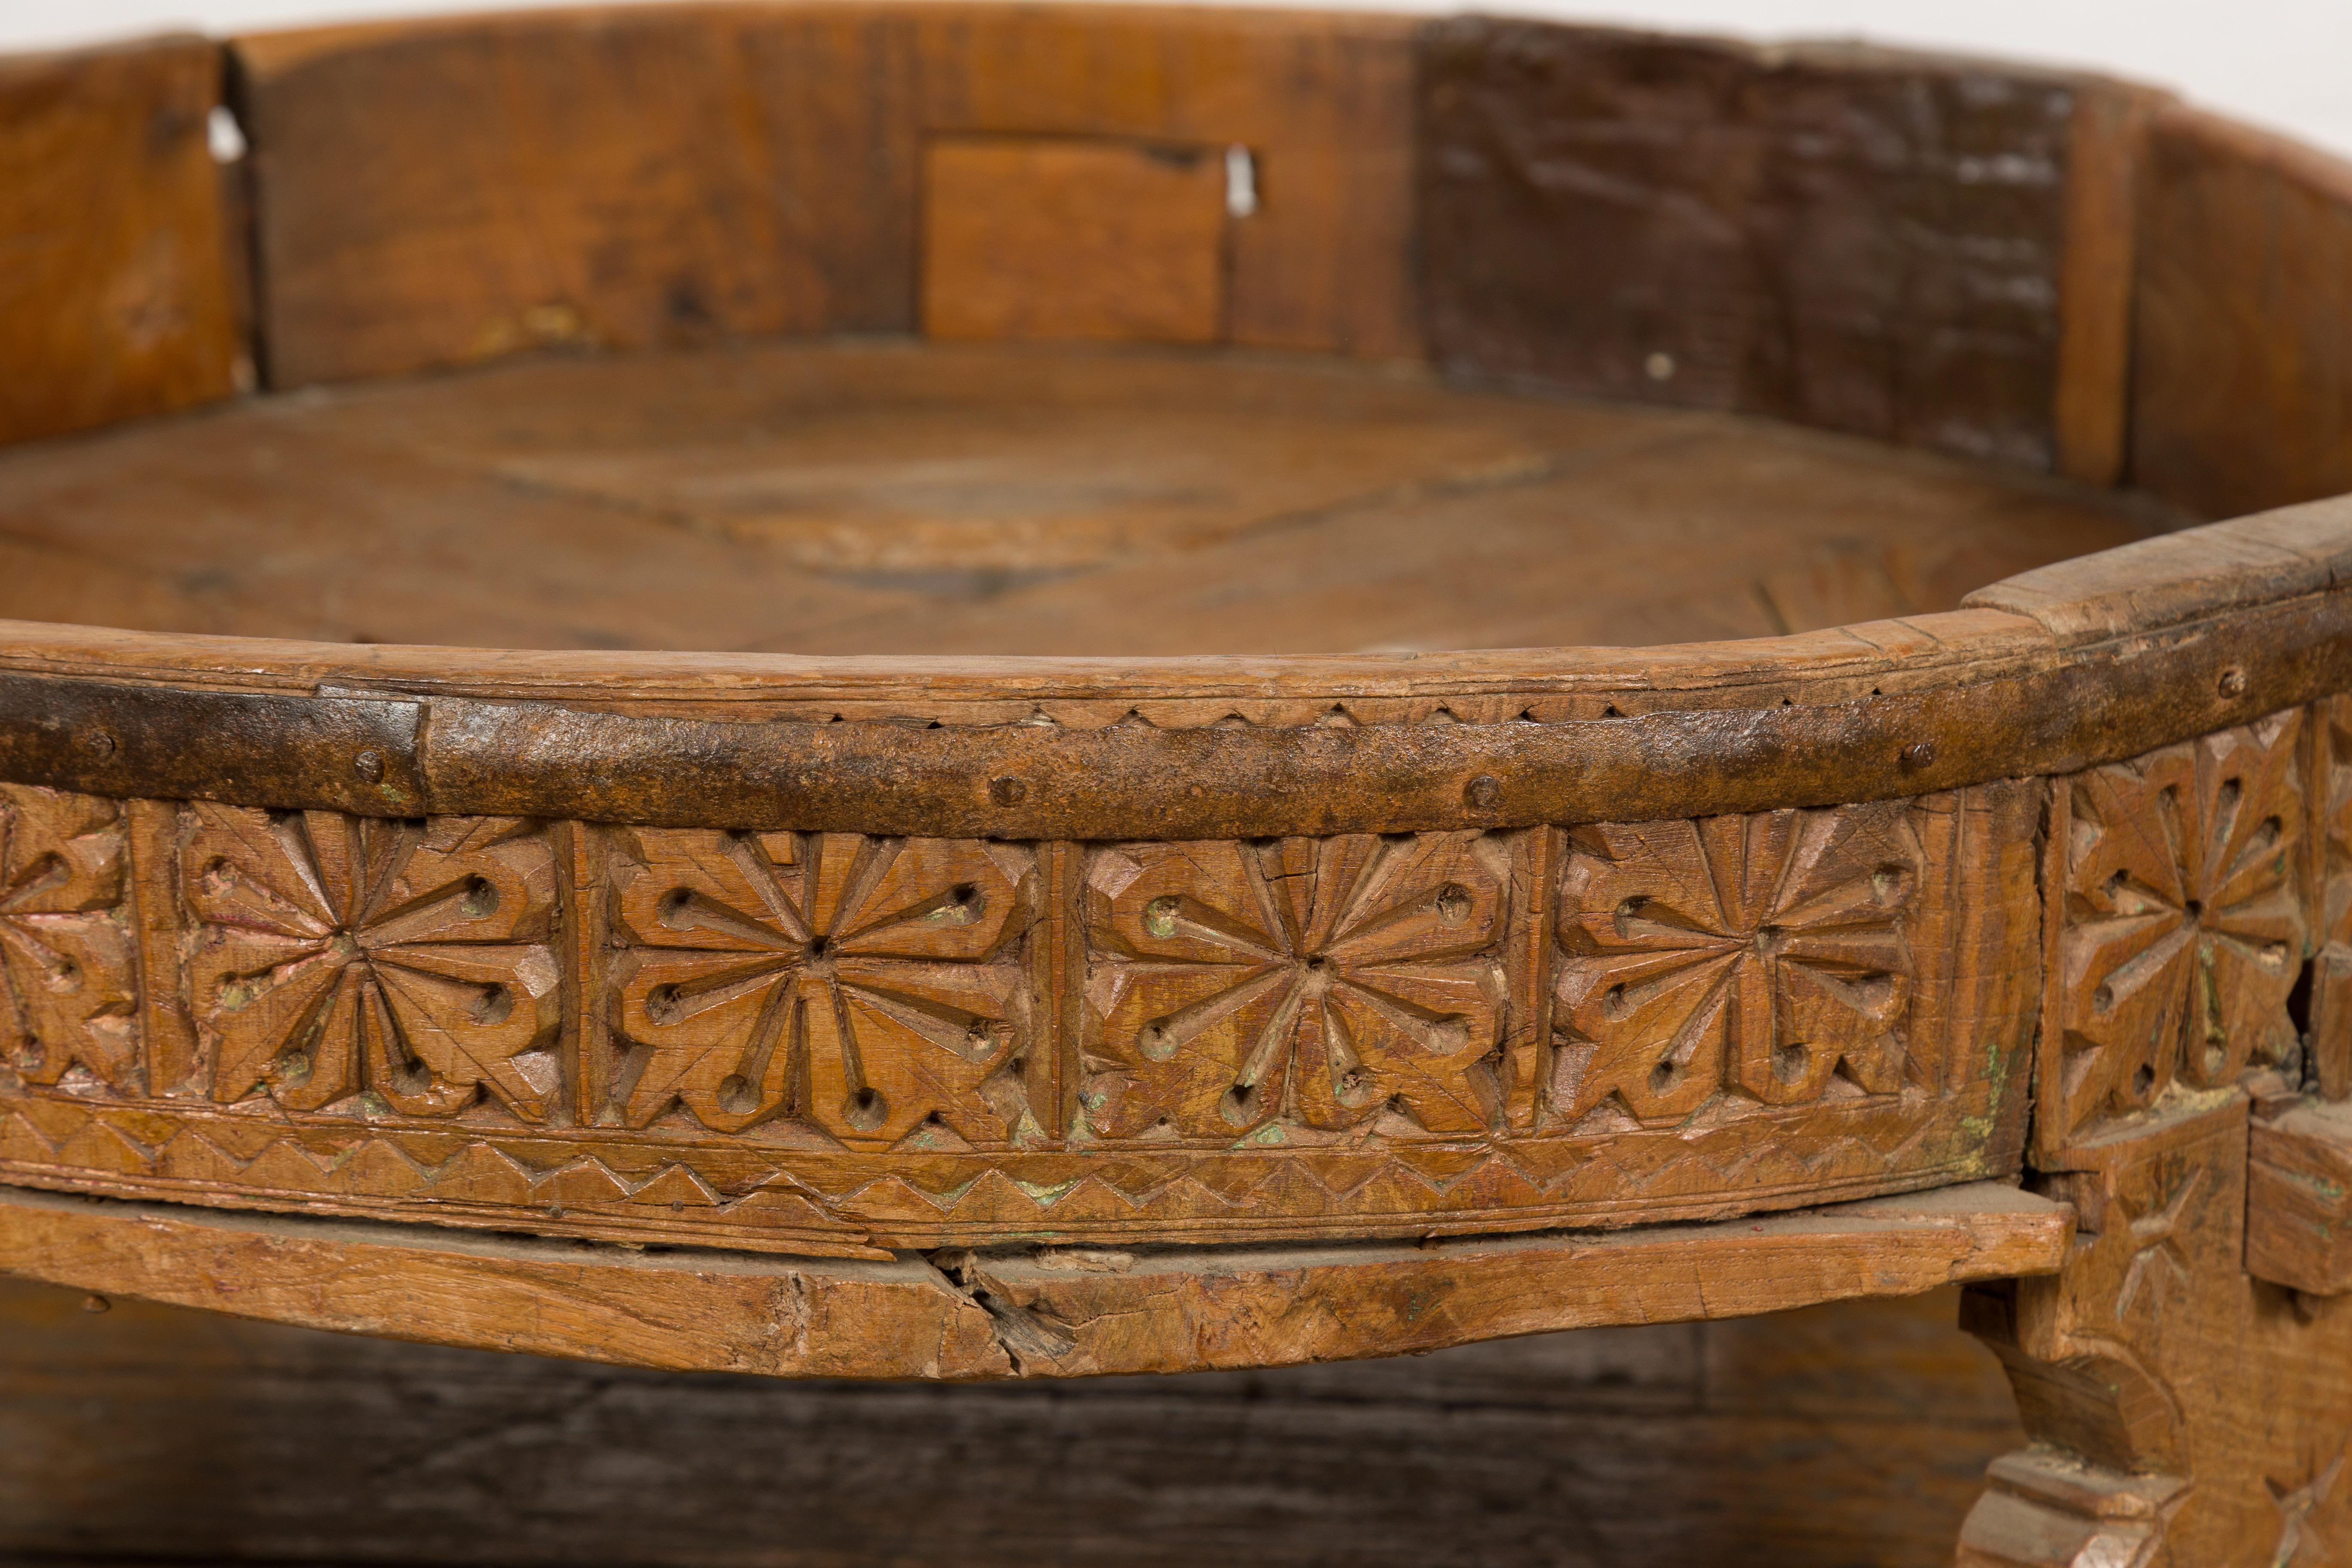 Indian Tribal 1920s Teak Chakki Grinding Table with Geometric Hand-Carved Motifs For Sale 5